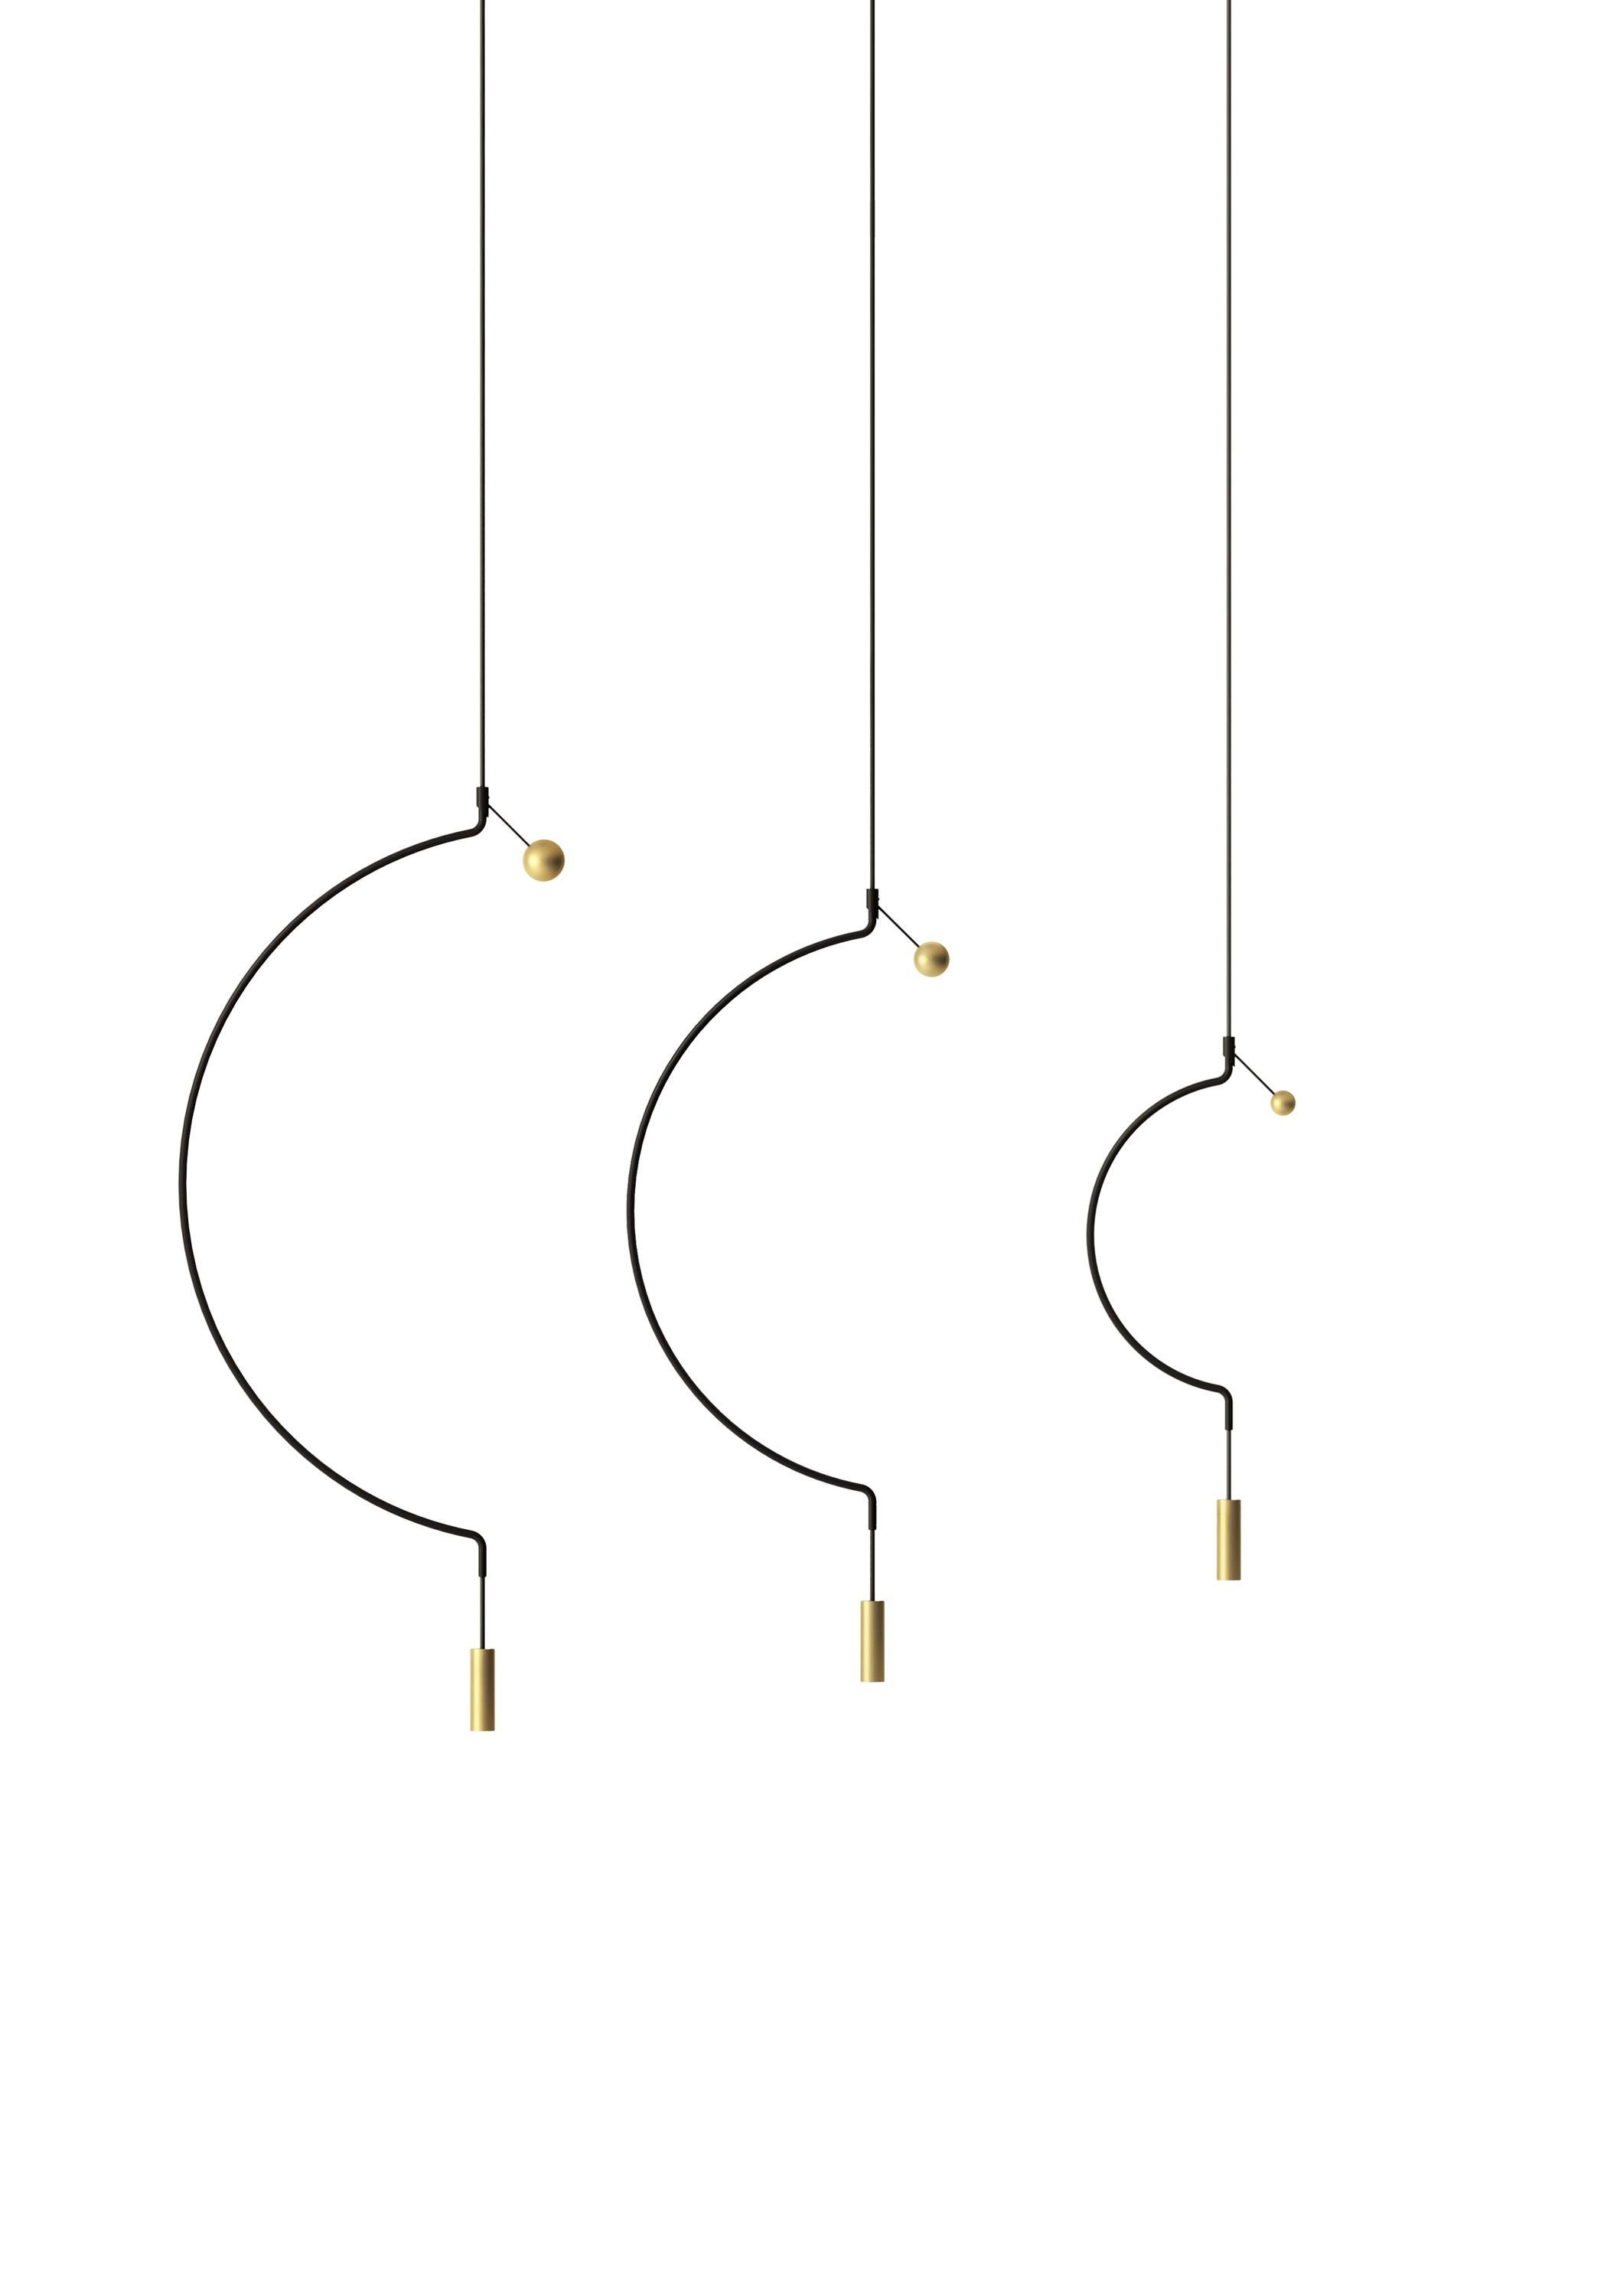 Axolight Liaison Model G1 Pendant Lamp in Black/Black by Sara Moroni

Modular lightness and elegance. Liaison tells about the perfect balance of three geometric archetypes: sphere, circle and cylinder compose a system that includes the single